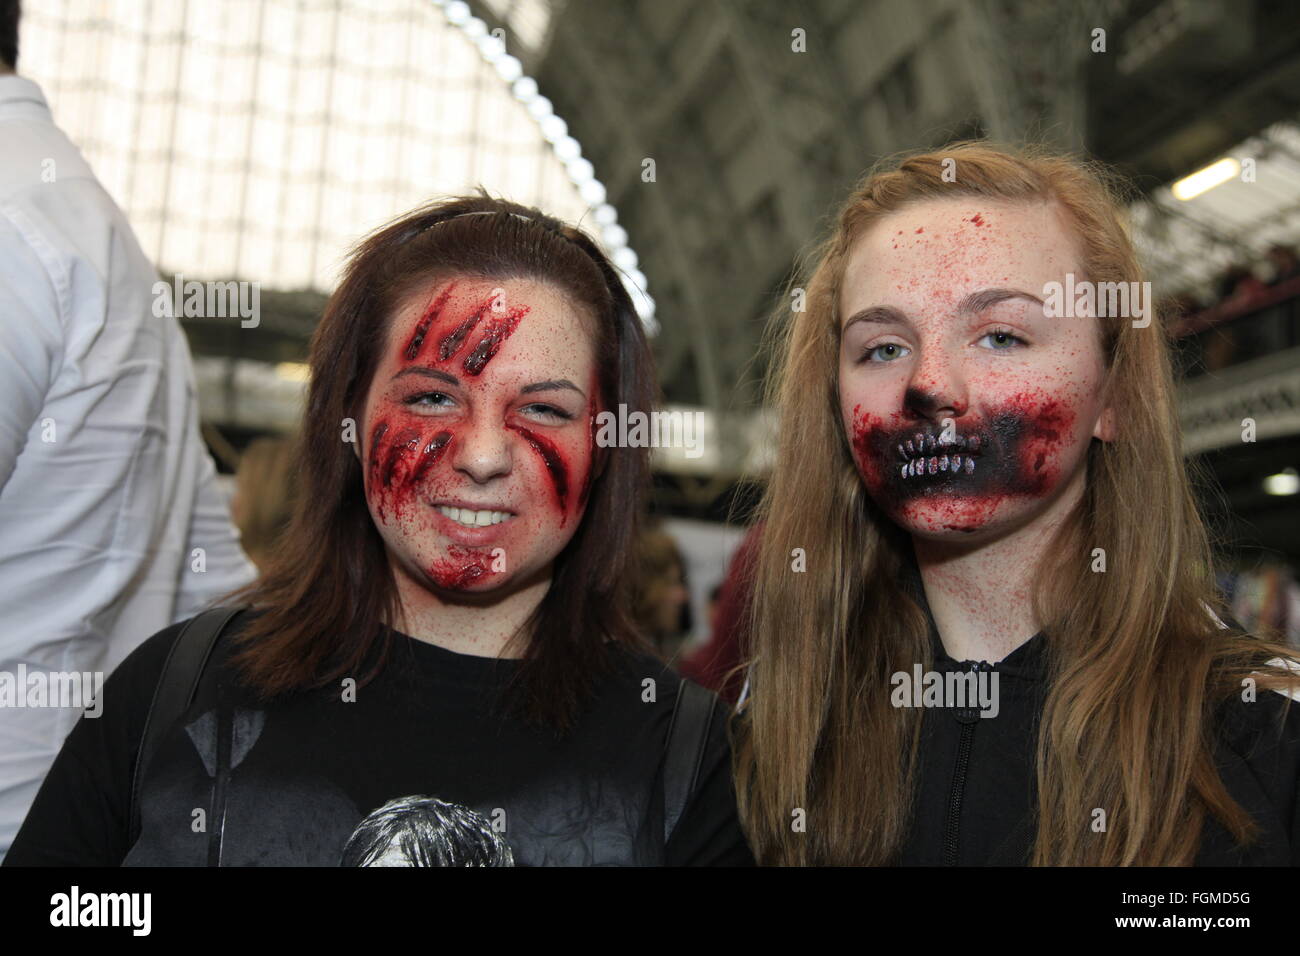 London, UK. 21st February, 2016. Walking Dead Convention Walker Stalker Con Olympia London 21/02/2016 walking dead fans gather to see stars of the show and stalls selling everything to do with the hit zombie American show photo ops with a star or zombie. cosplayers & undead walkers roaming the event floor entertaining the crowds. Stalls selling make-up and characters from the show. Credit:  Paul Thompson/Alamy Live News Stock Photo